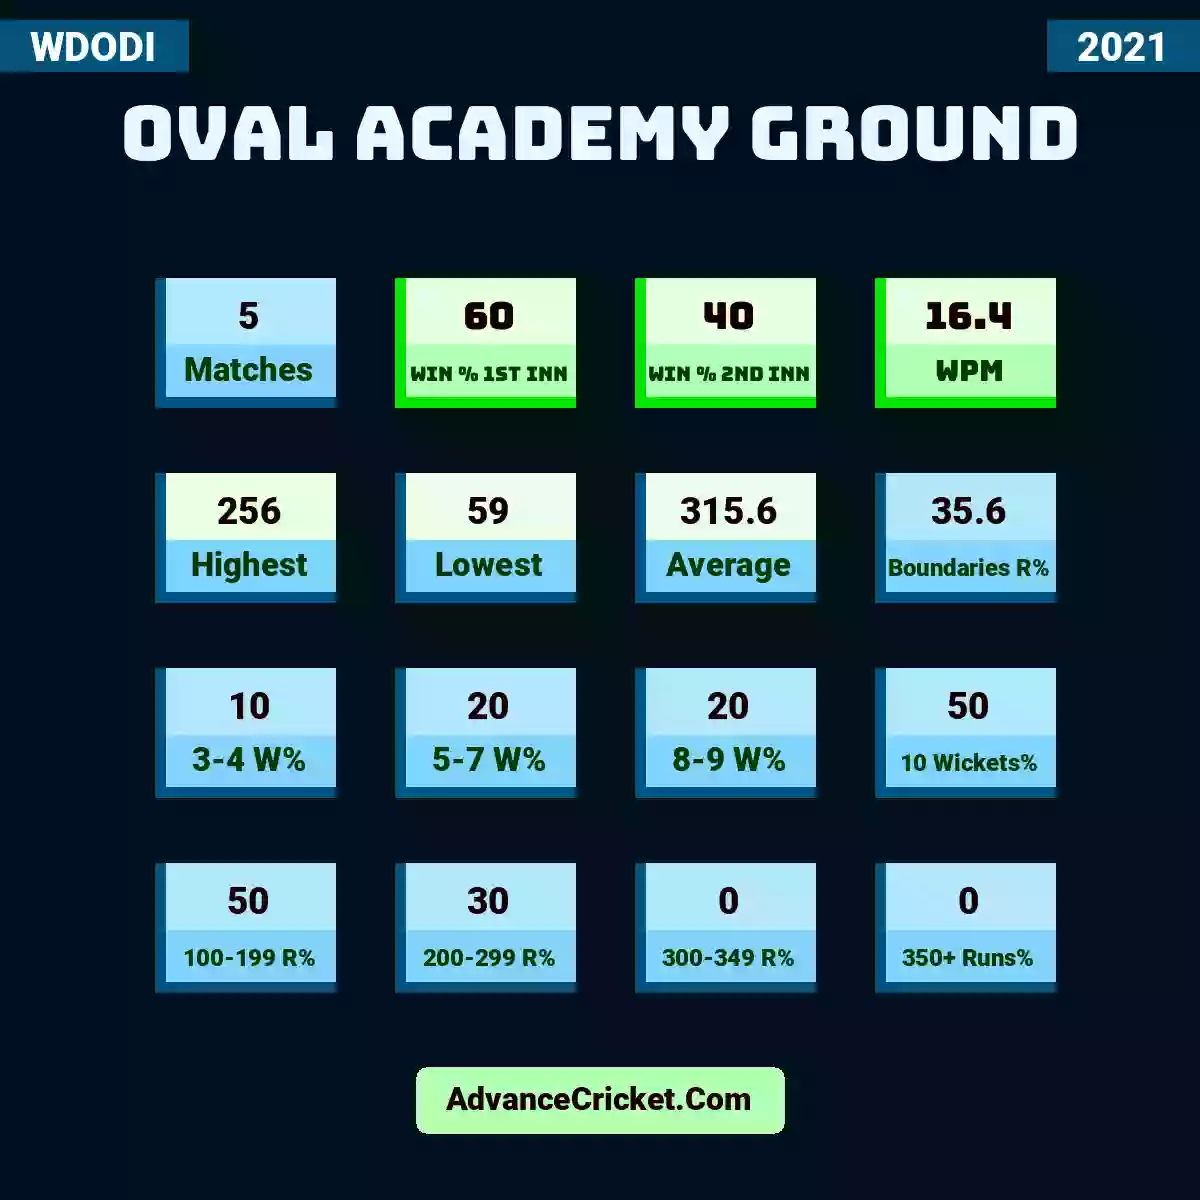 Image showing Oval Academy Ground with Matches: 5, Win % 1st Inn: 60, Win % 2nd Inn: 40, WPM: 16.4, Highest: 256, Lowest: 59, Average: 315.6, Boundaries R%: 35.6, 3-4 W%: 10, 5-7 W%: 20, 8-9 W%: 20, 10 Wickets%: 50, 100-199 R%: 50, 200-299 R%: 30, 300-349 R%: 0, 350+ Runs%: 0.